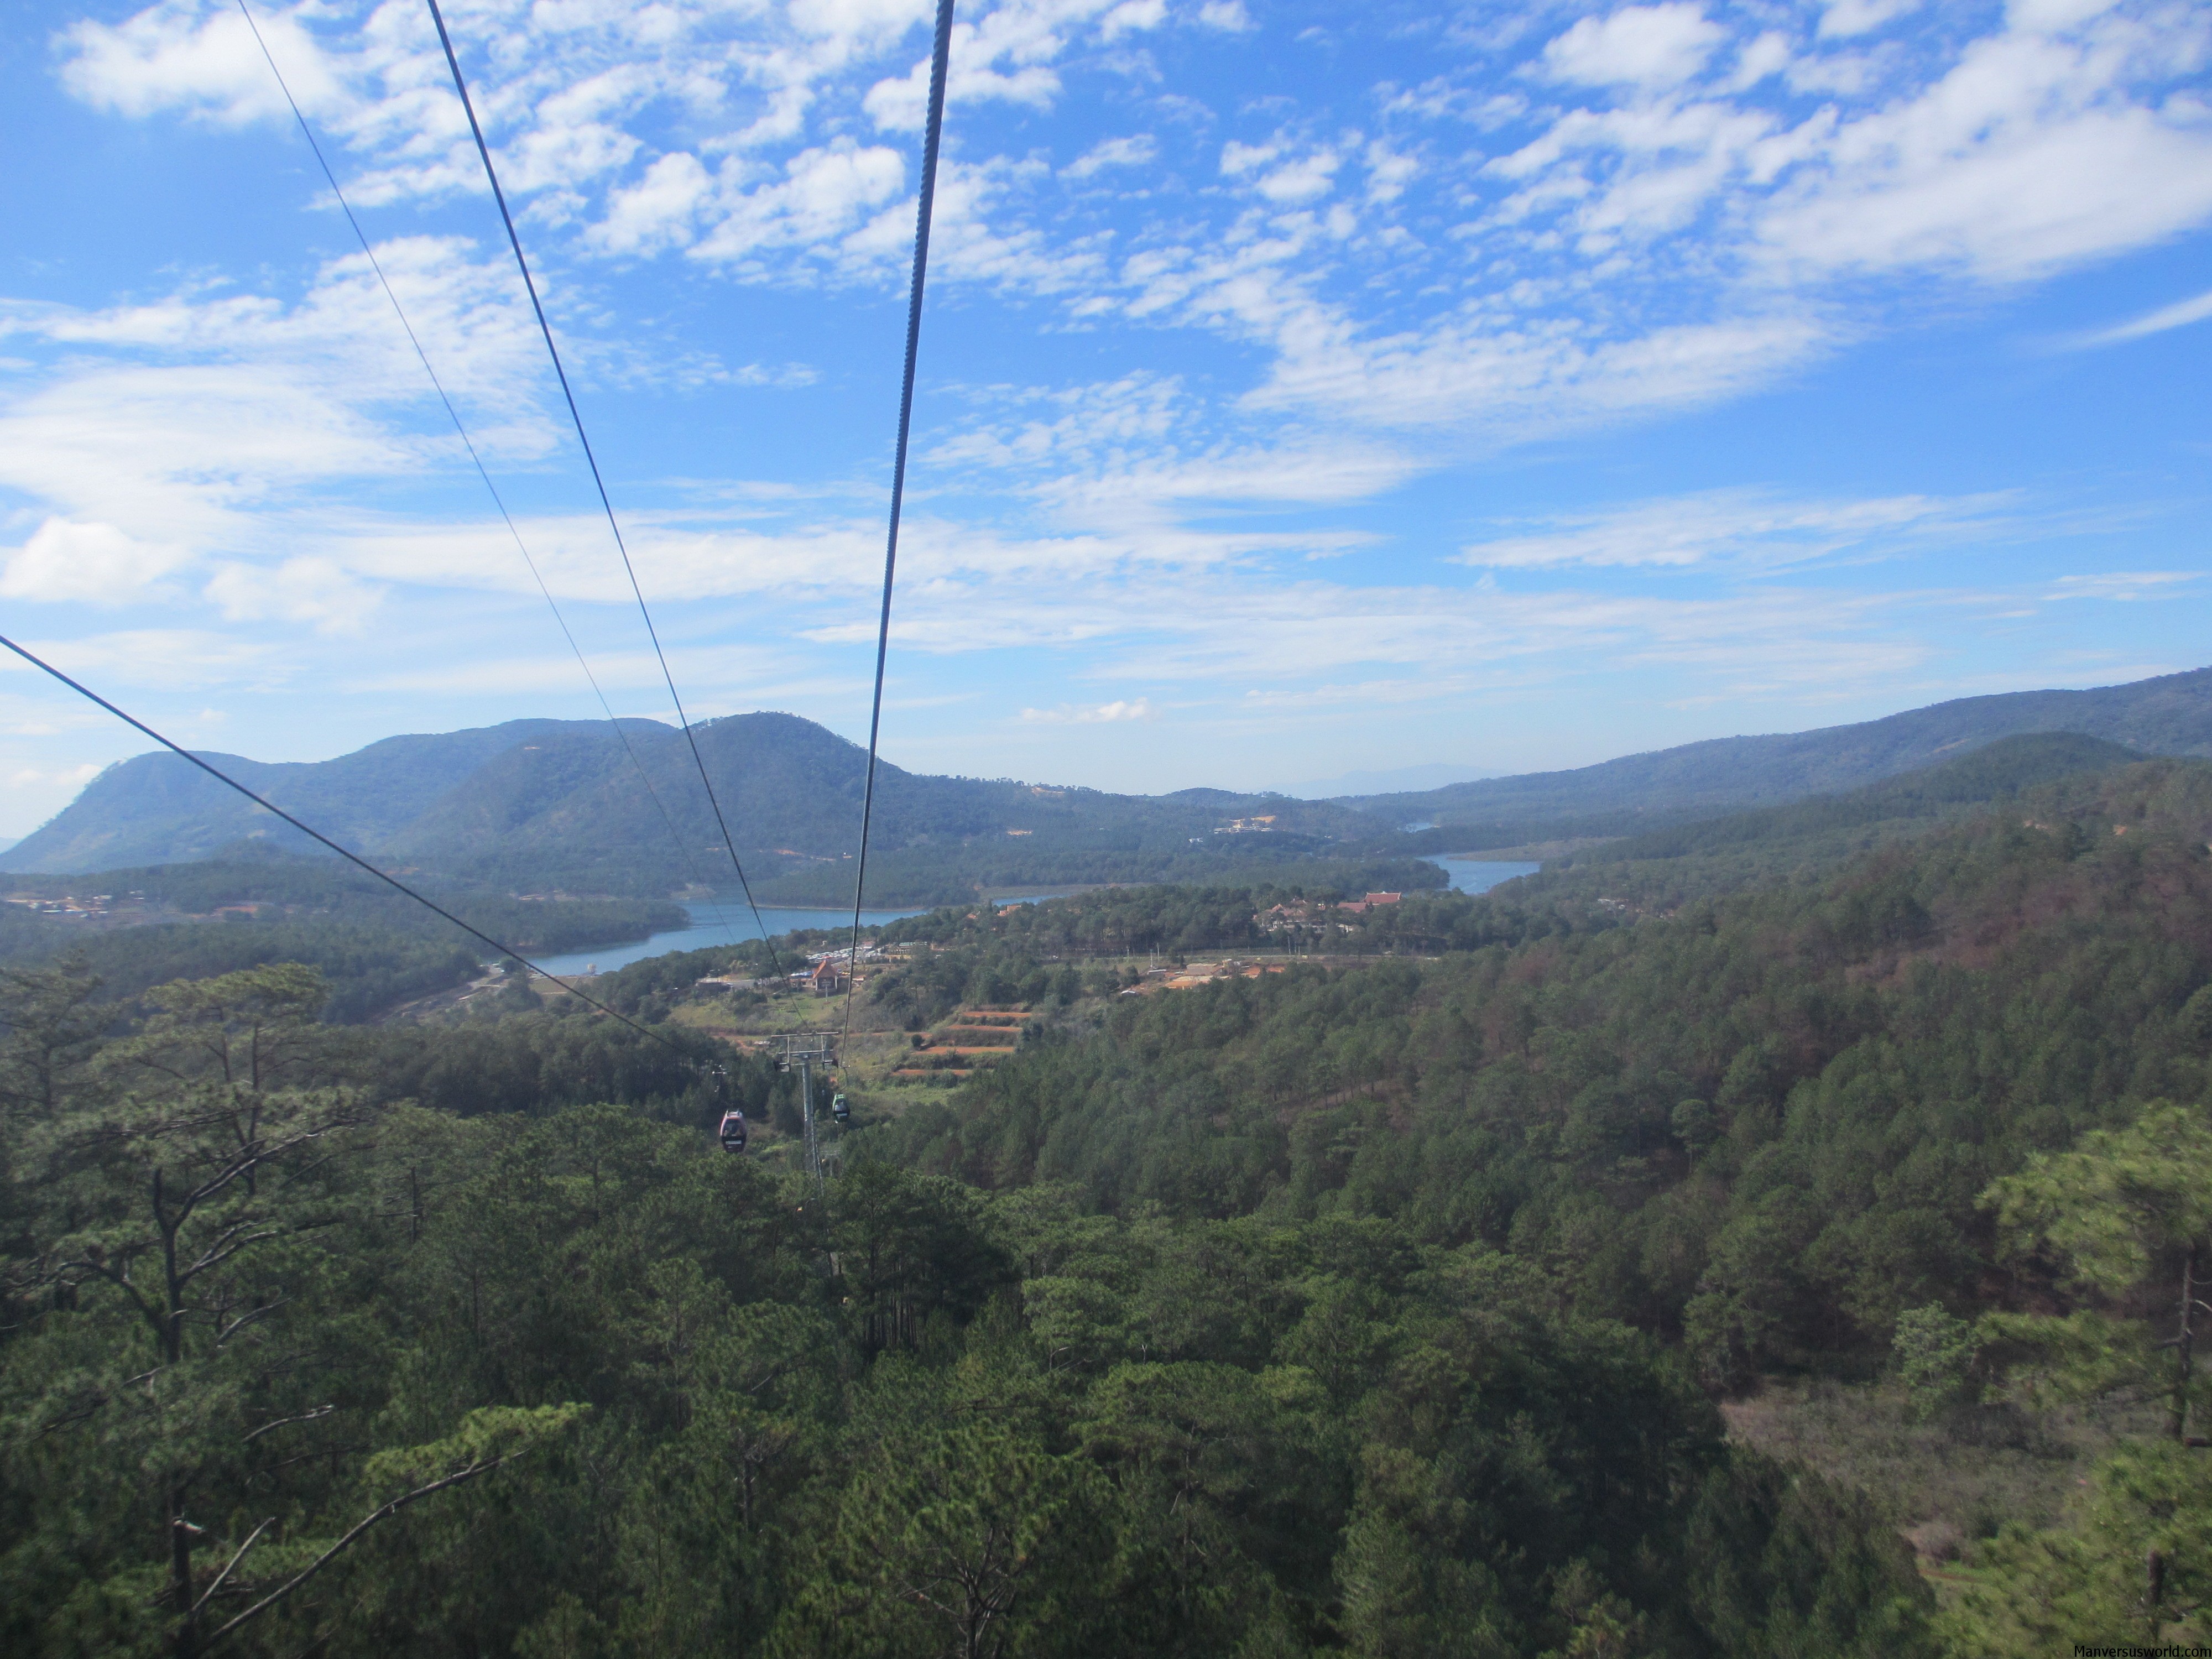 The beautiful view of Dalat from cable car